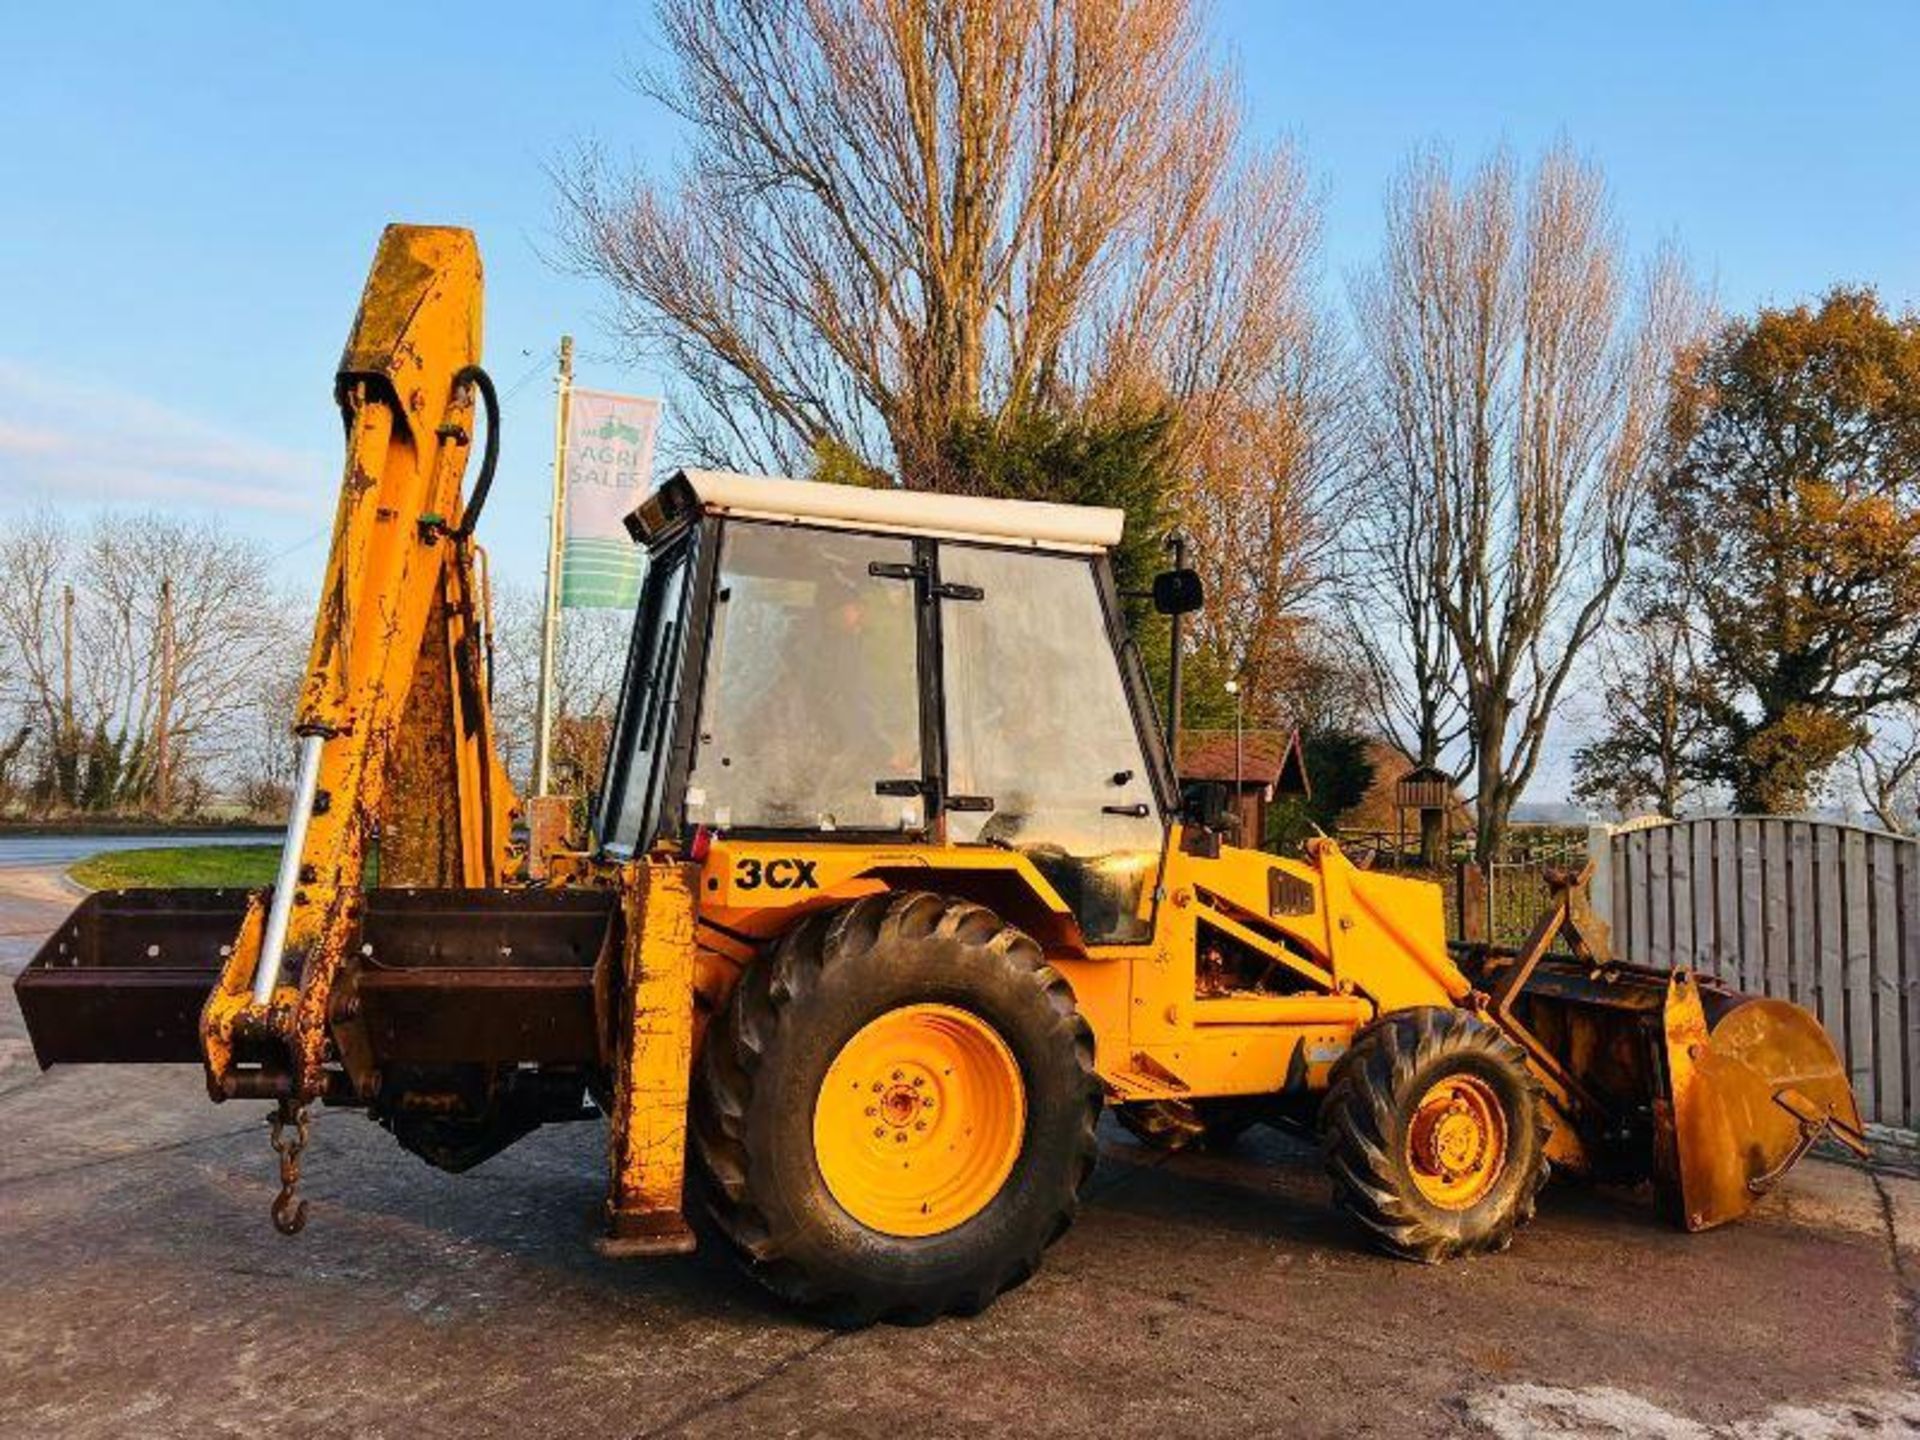 JCB 3CX PROJECT 7 4WD BACKHOE DIGGER C/W 4 X BUCKETS - Image 3 of 10